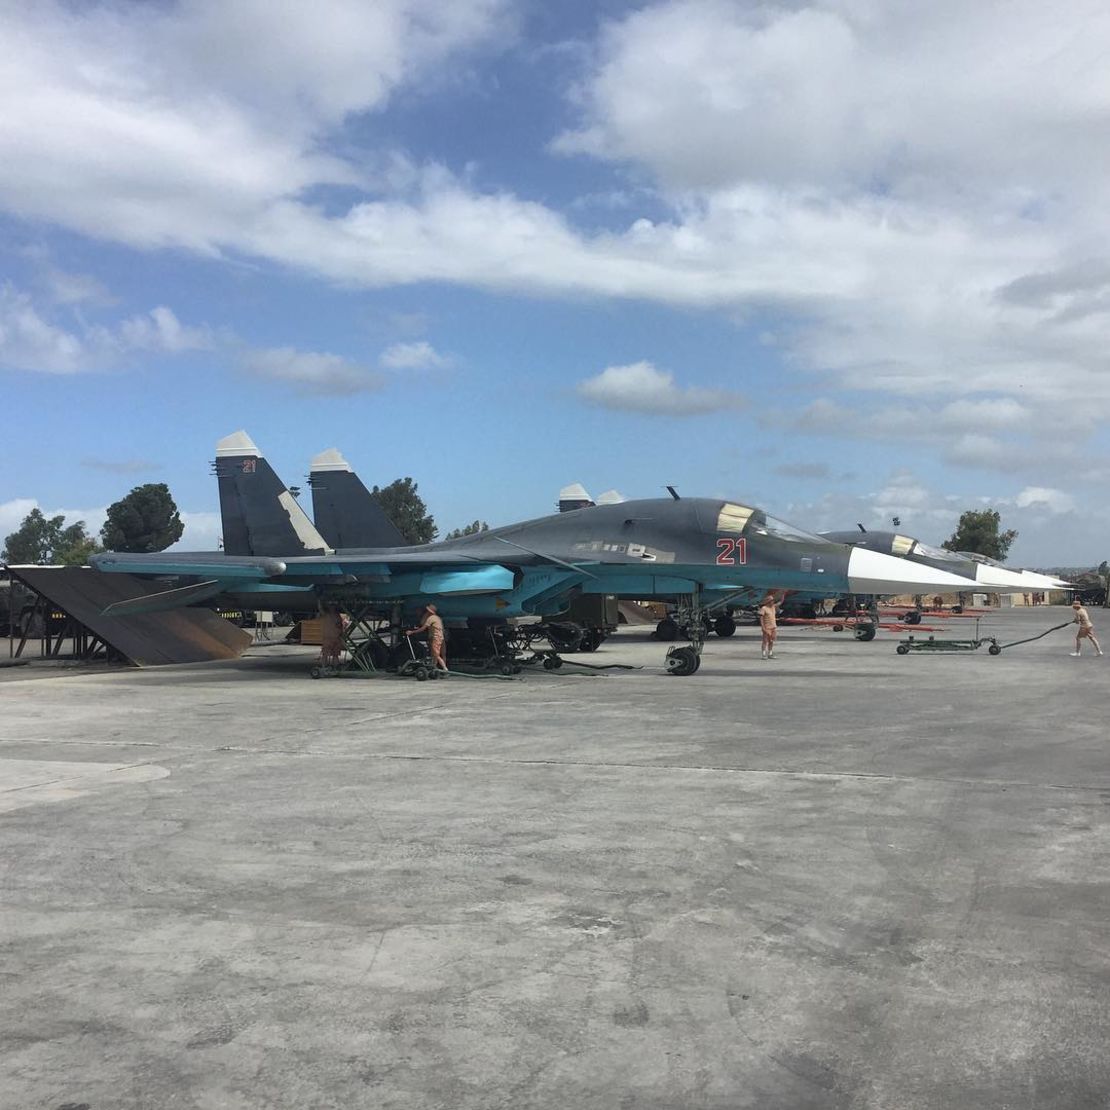 Two Russian SU-34s on the tarmac at Hmeymim base in northern Syria, May 4, 2016.